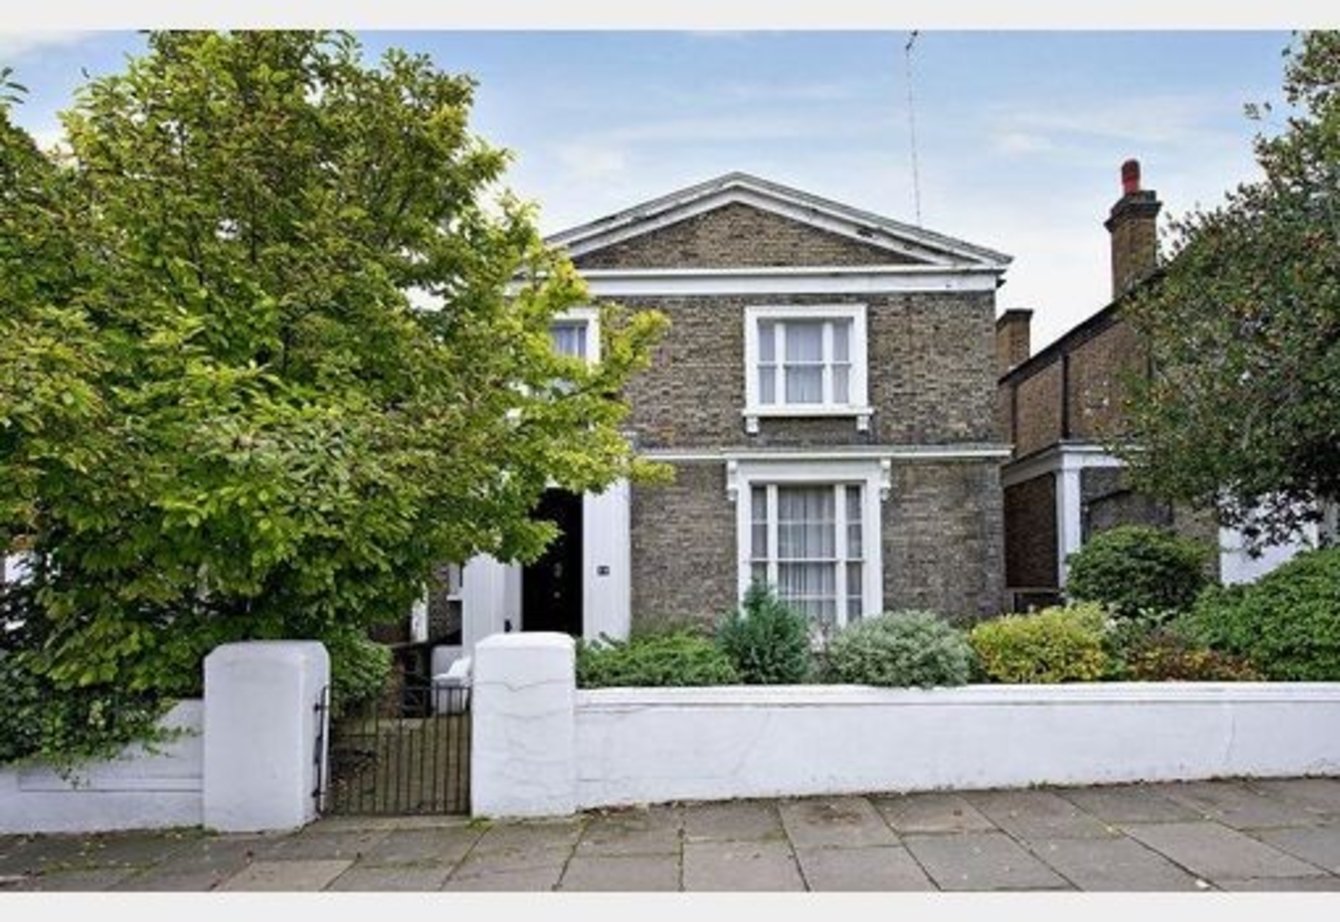 Property for sale in Blenheim Road, St Johns Wood, NW8 | Ian Green ...